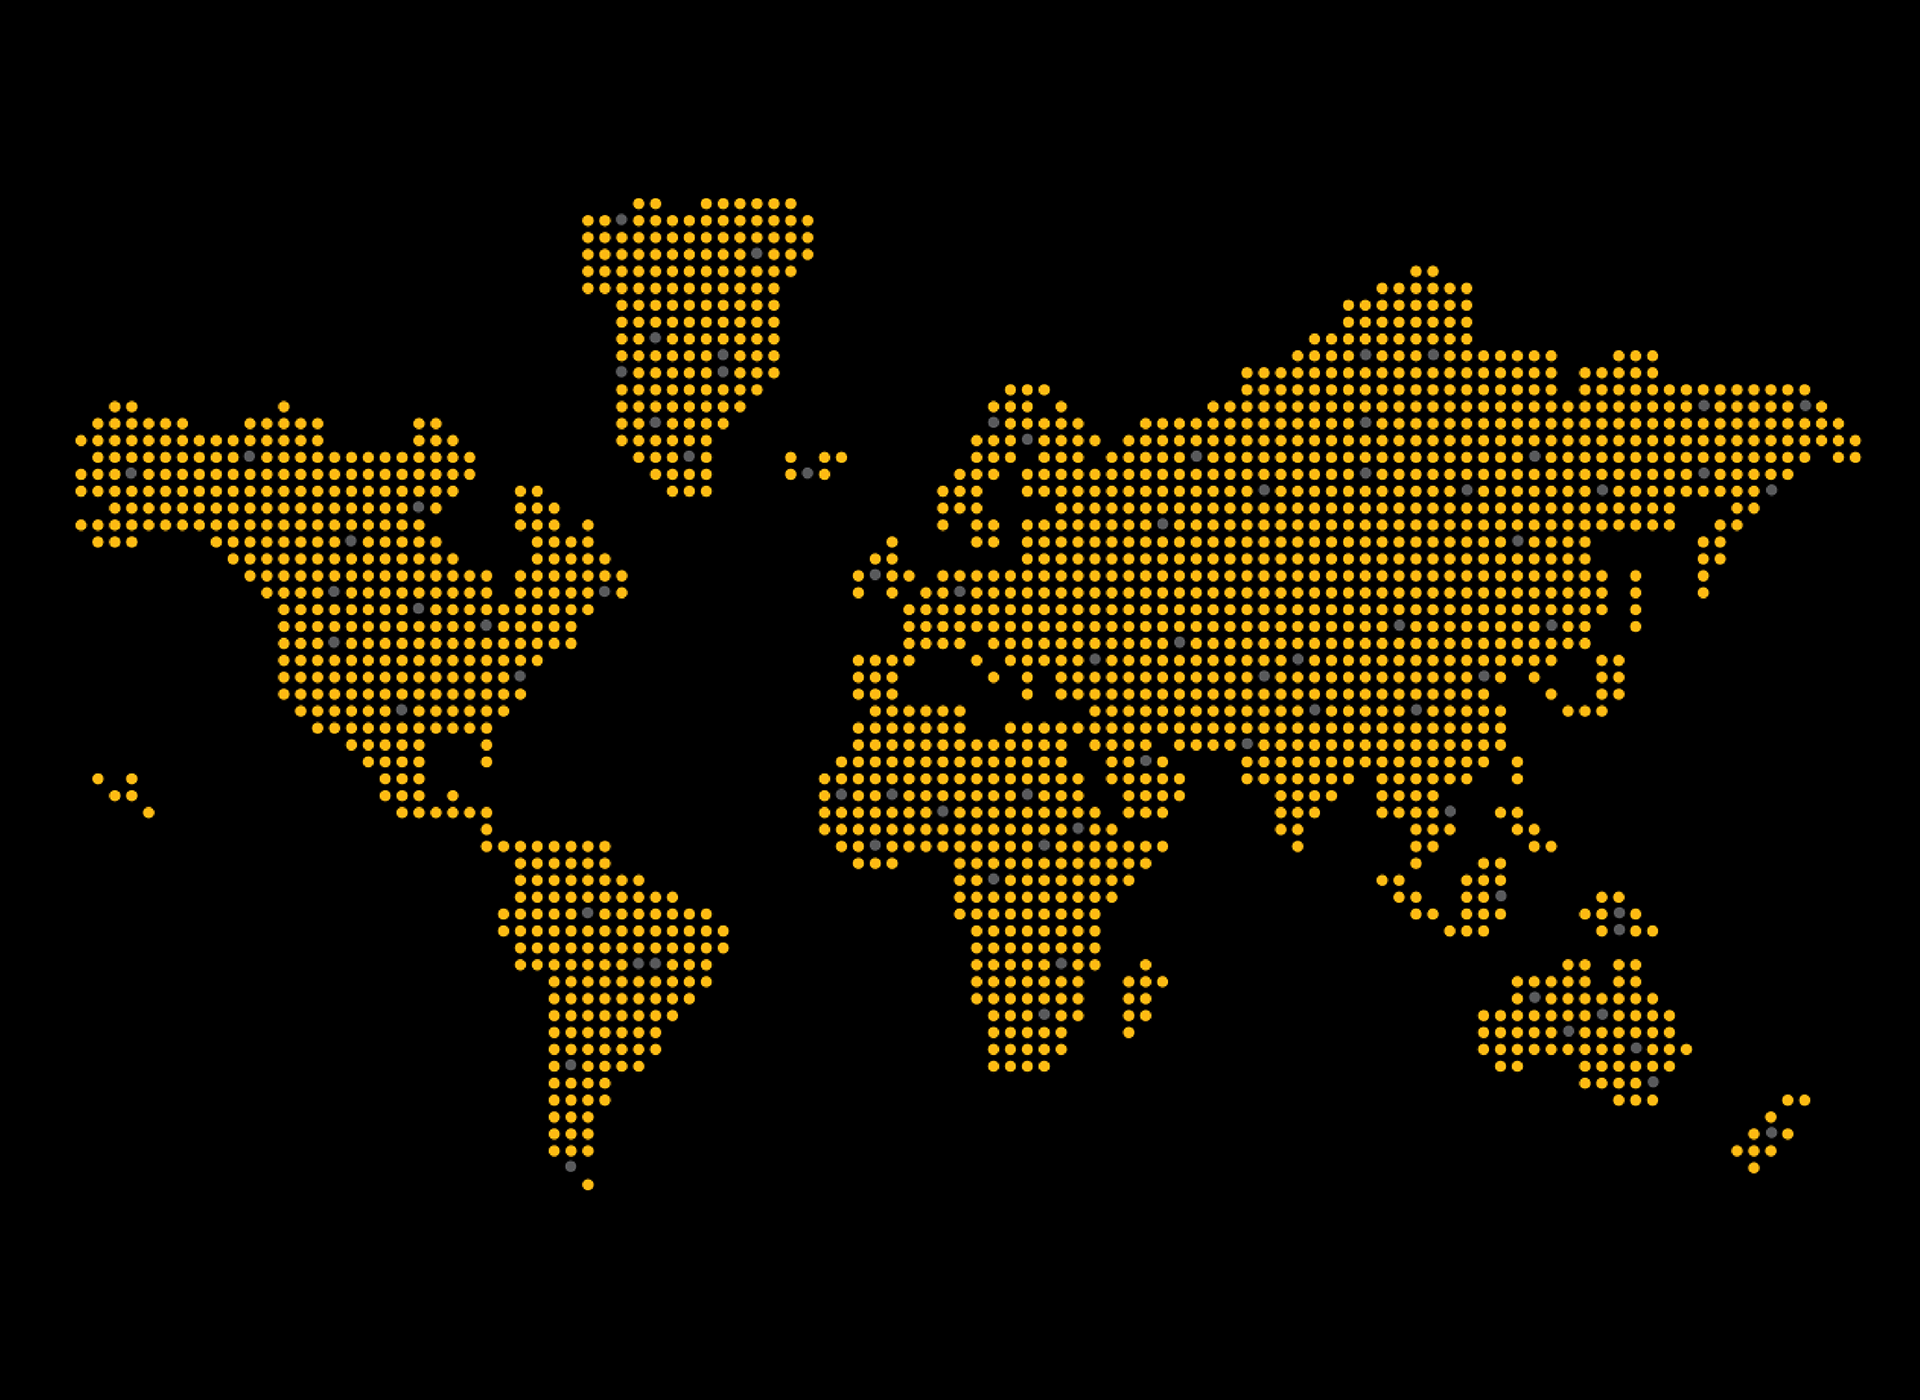 Digital map of world continents